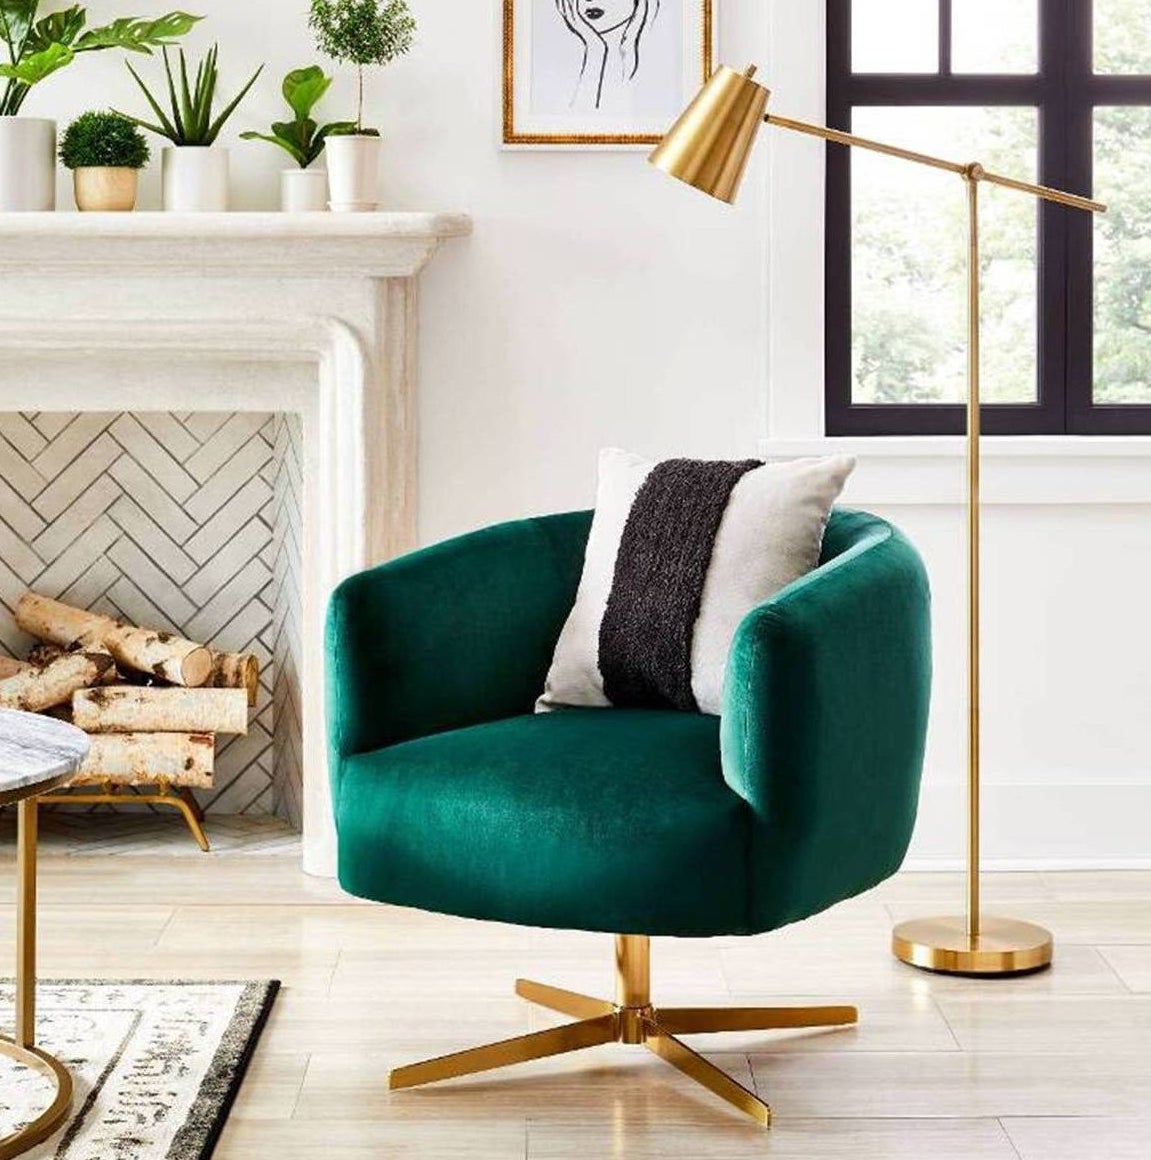 brass cantilever floor lamp next to a green arm chair